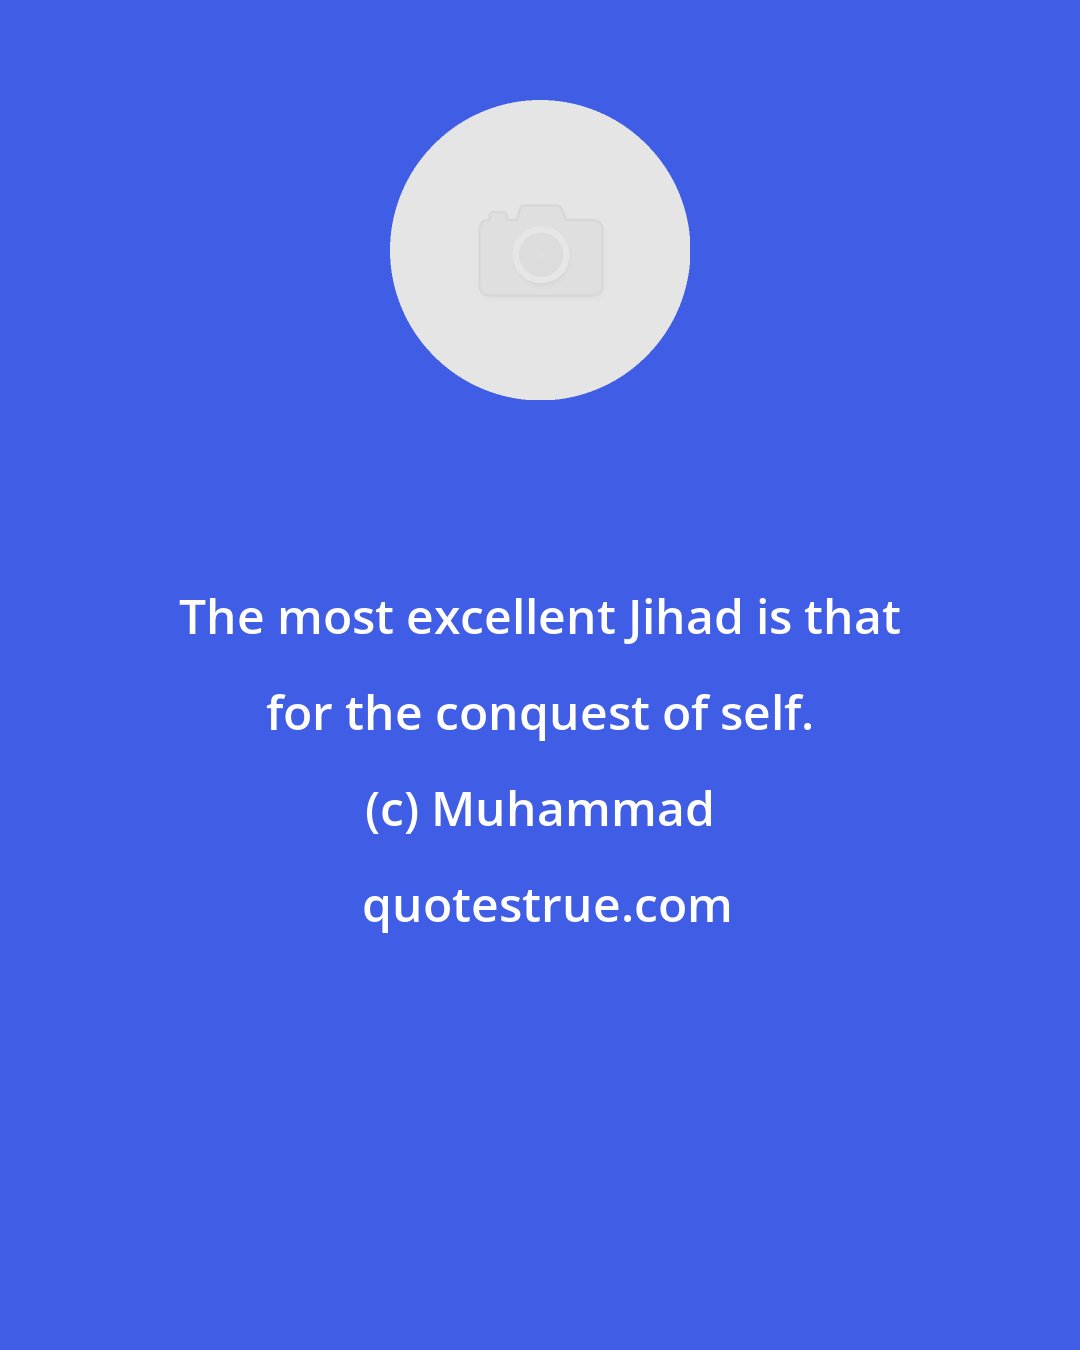 Muhammad: The most excellent Jihad is that for the conquest of self.